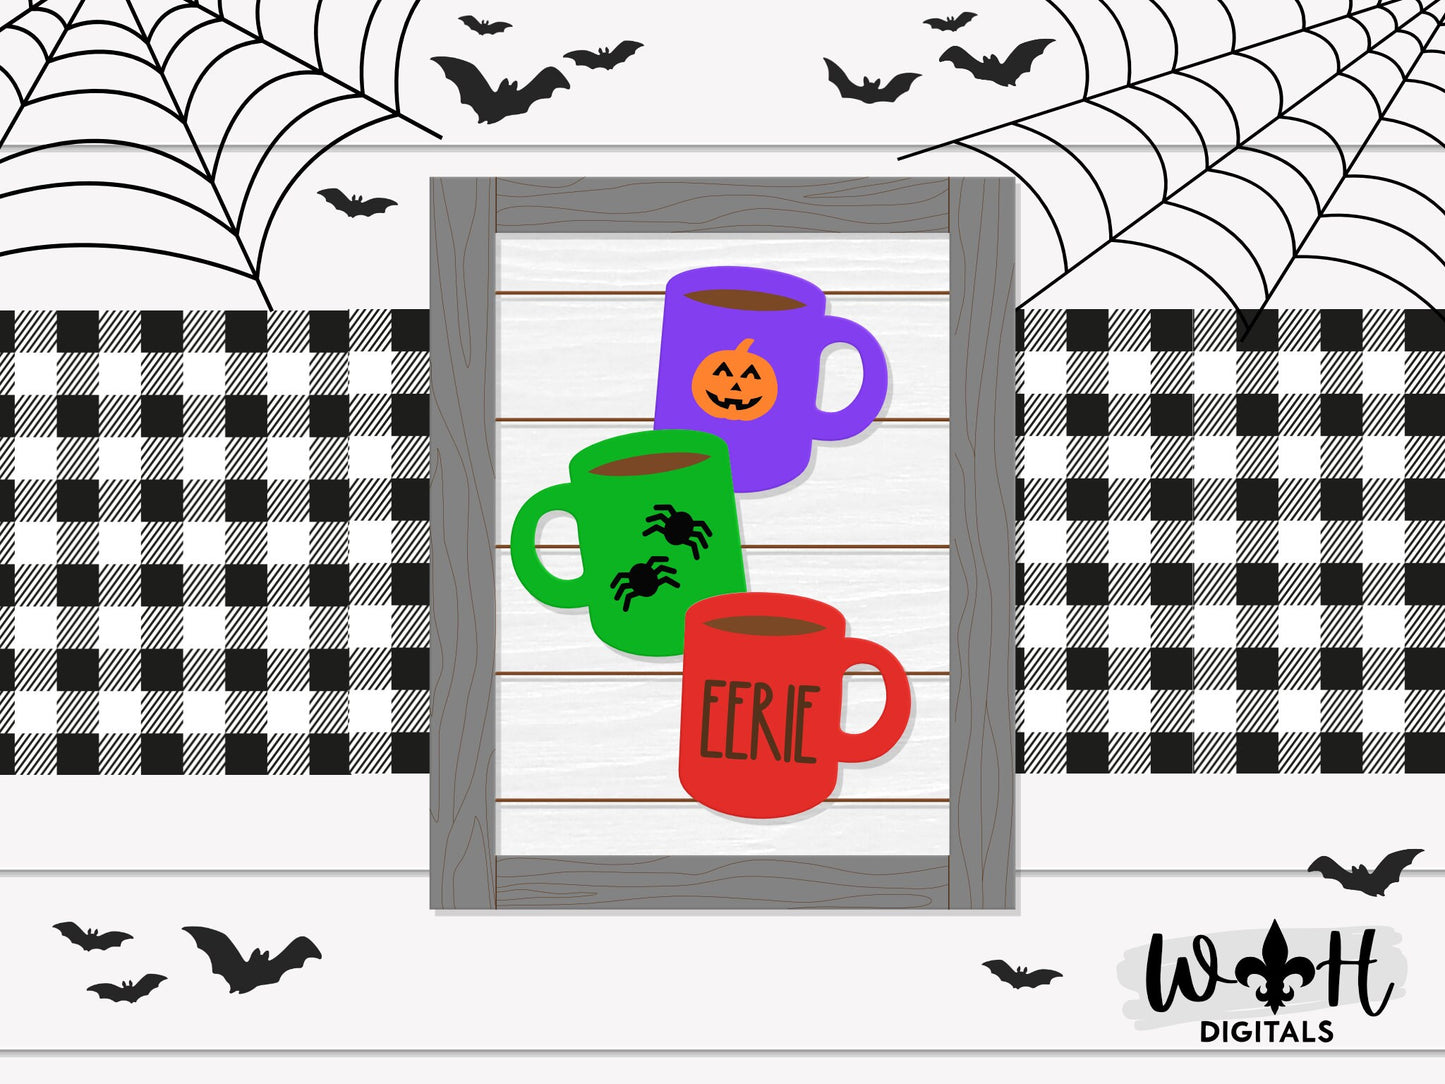 Halloween Stacked Coffee Mugs Farmhouse Frame Sign Bundle - Tiered Tray Decor and DIY Kits - Cut File For Glowforge Laser - Digital SVG File